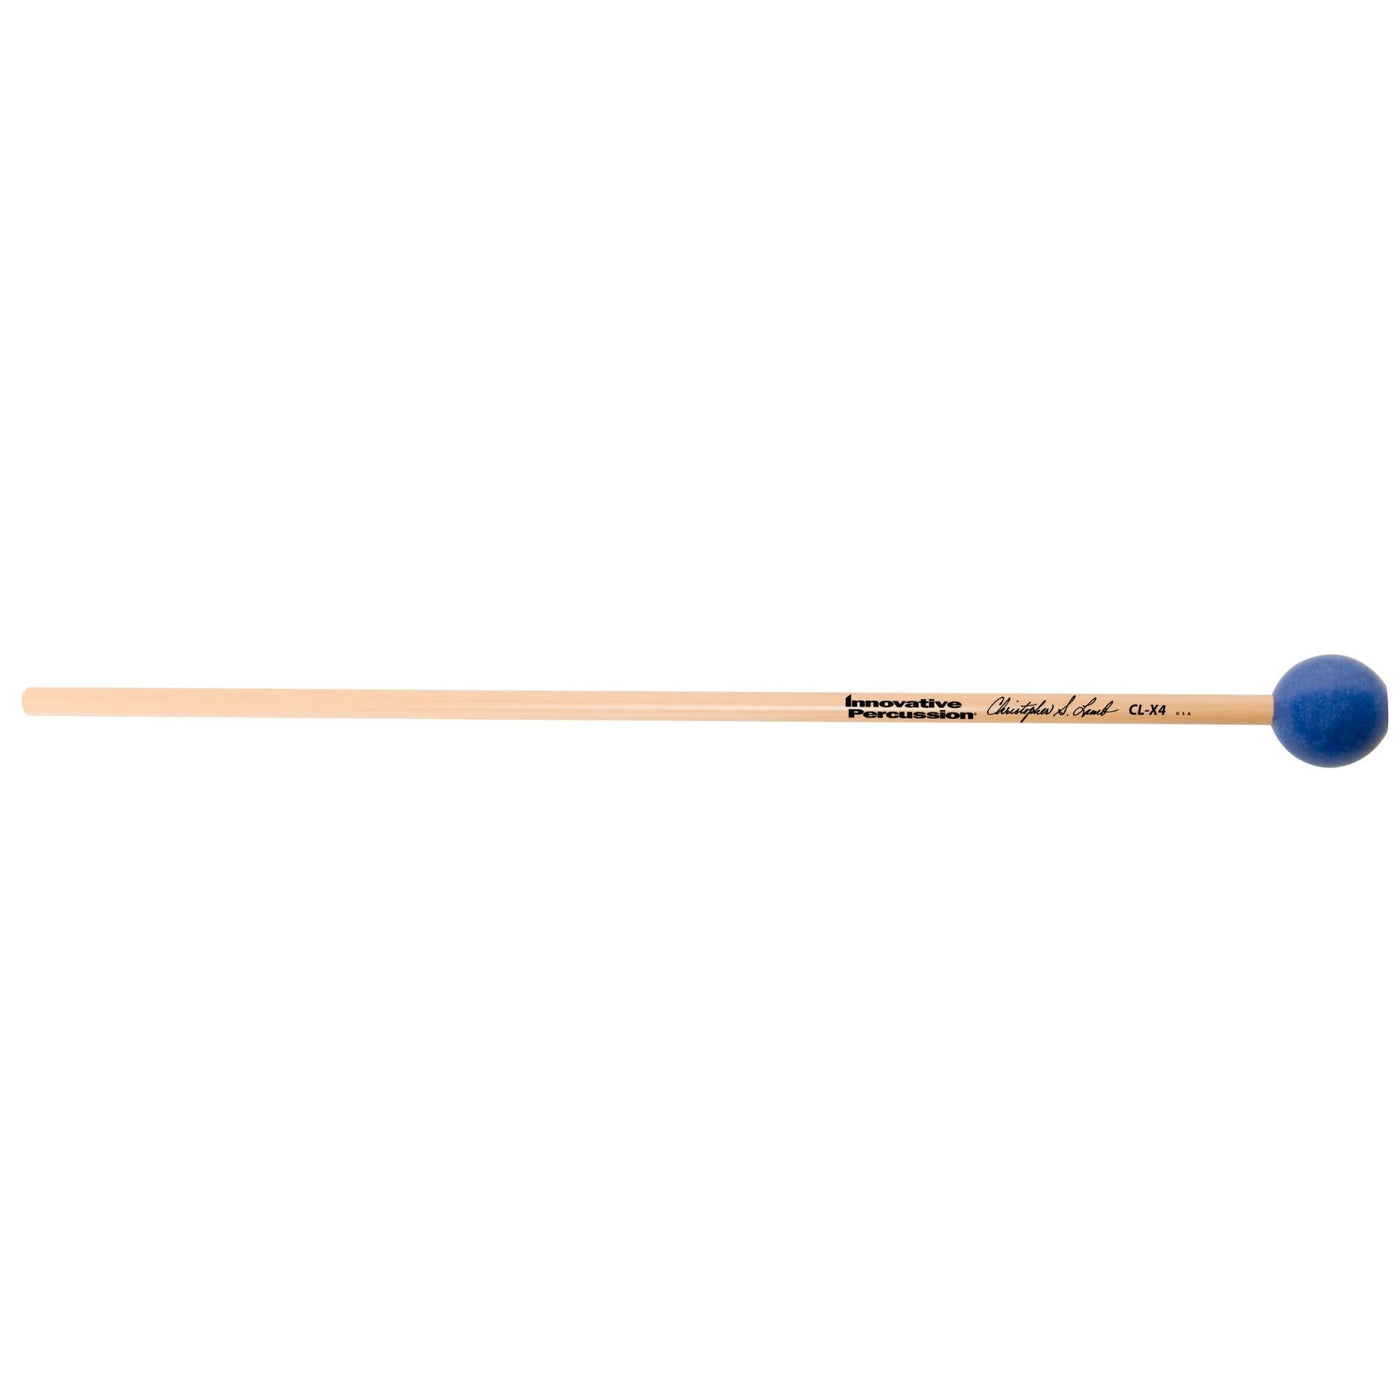 Innovative Percussion CL-X4 Keyboard Mallet